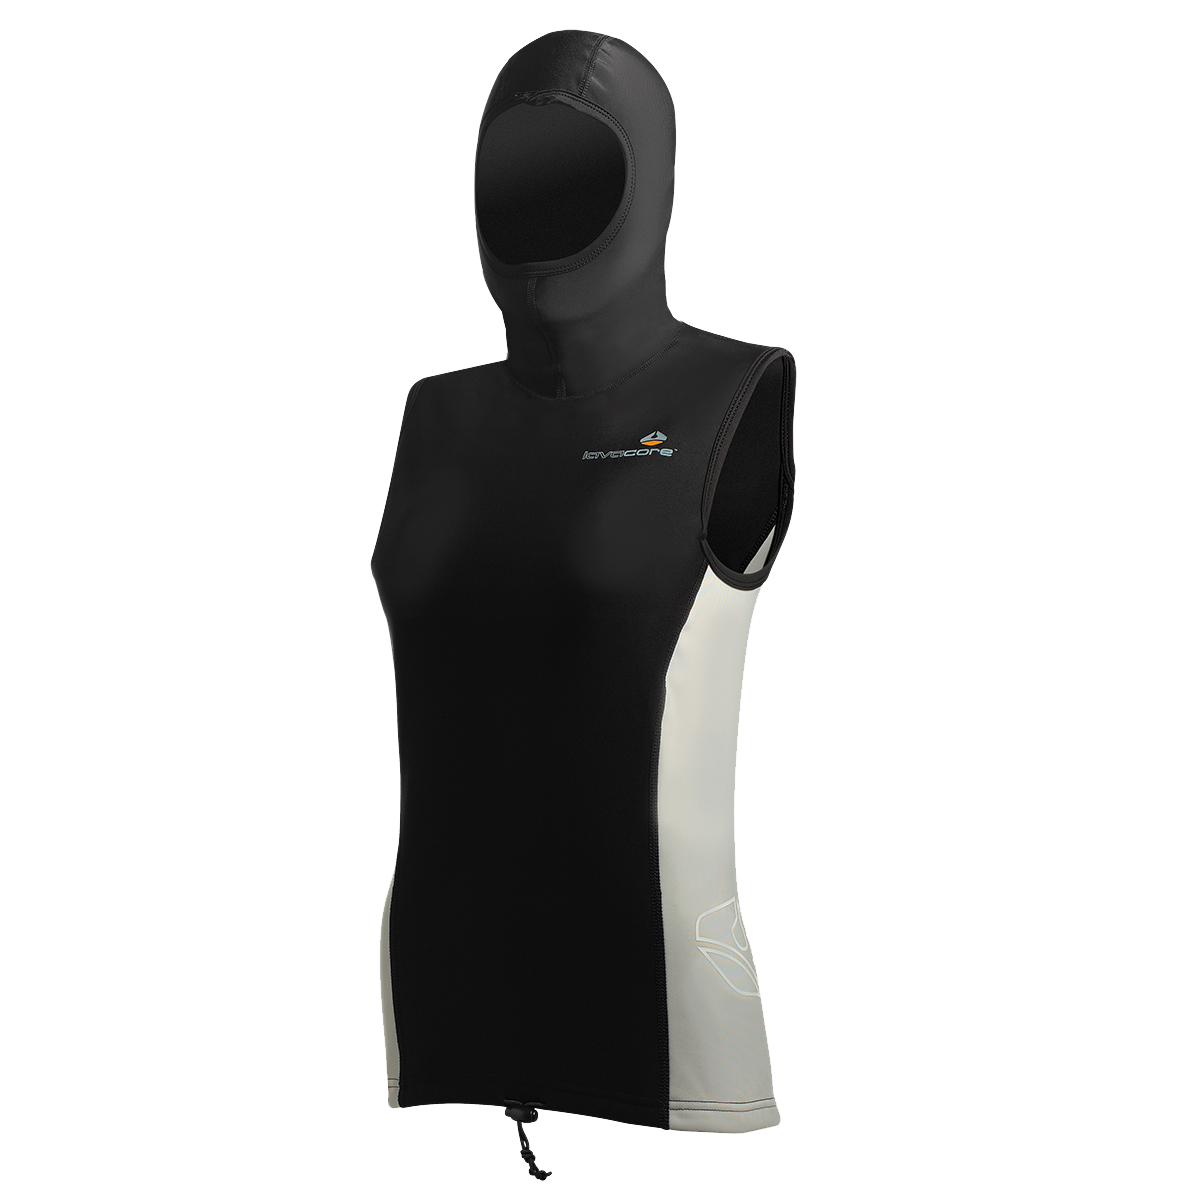 Xsmall Details about   Lavacore Unisex Polytherm Hood for Watersports 815-7017-51 